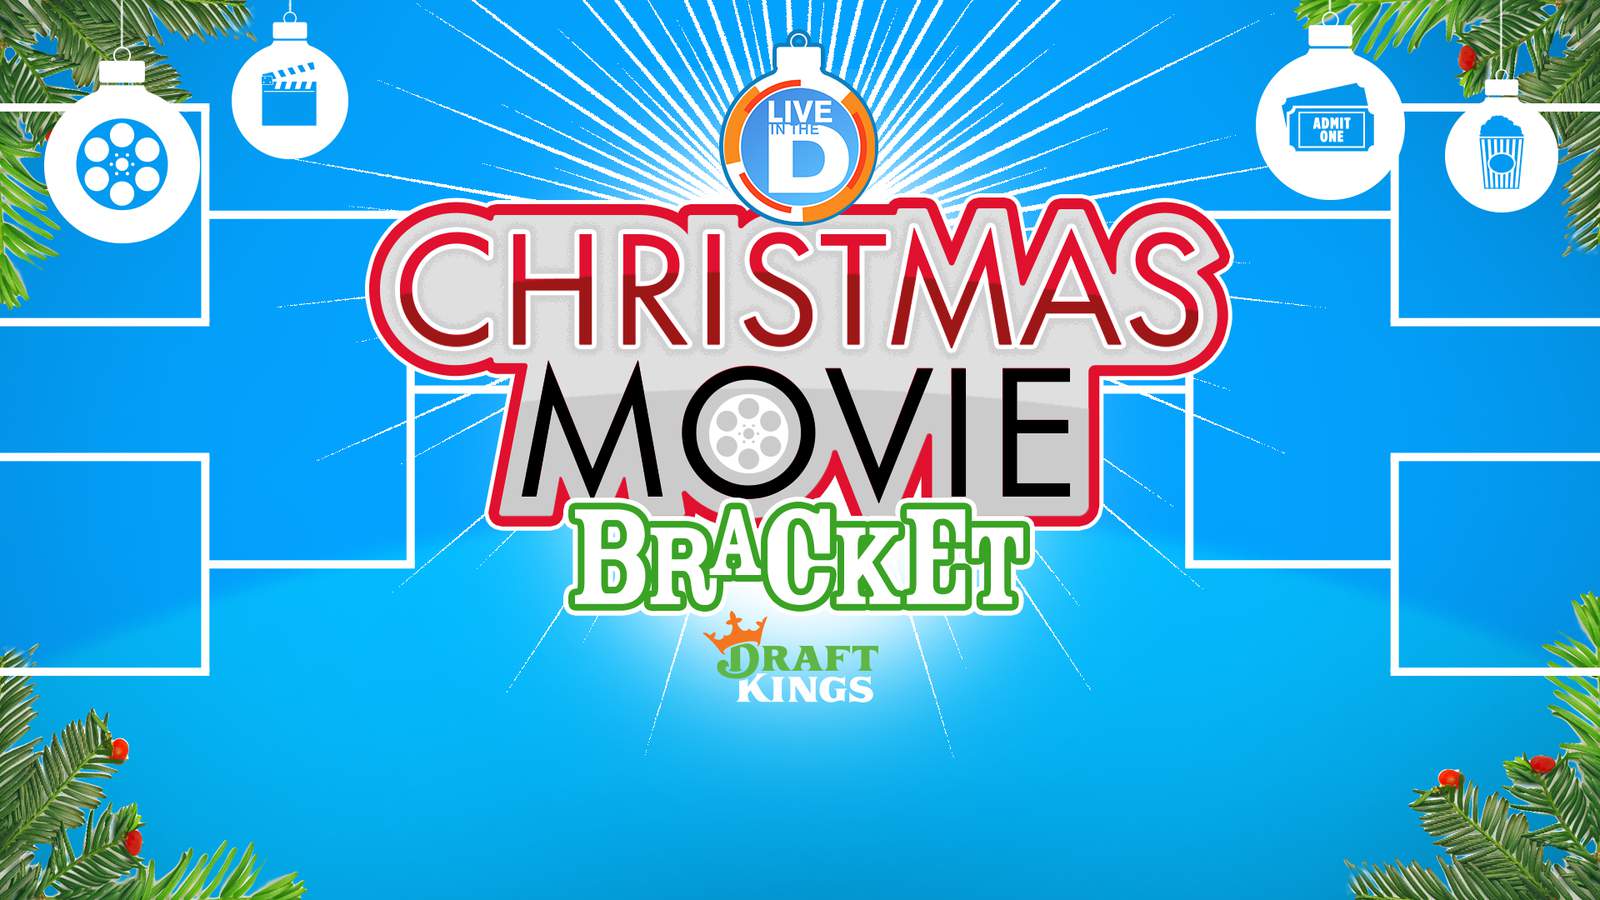 What’s the best Christmas movie? Vote in Round 3 of our bracket challenge